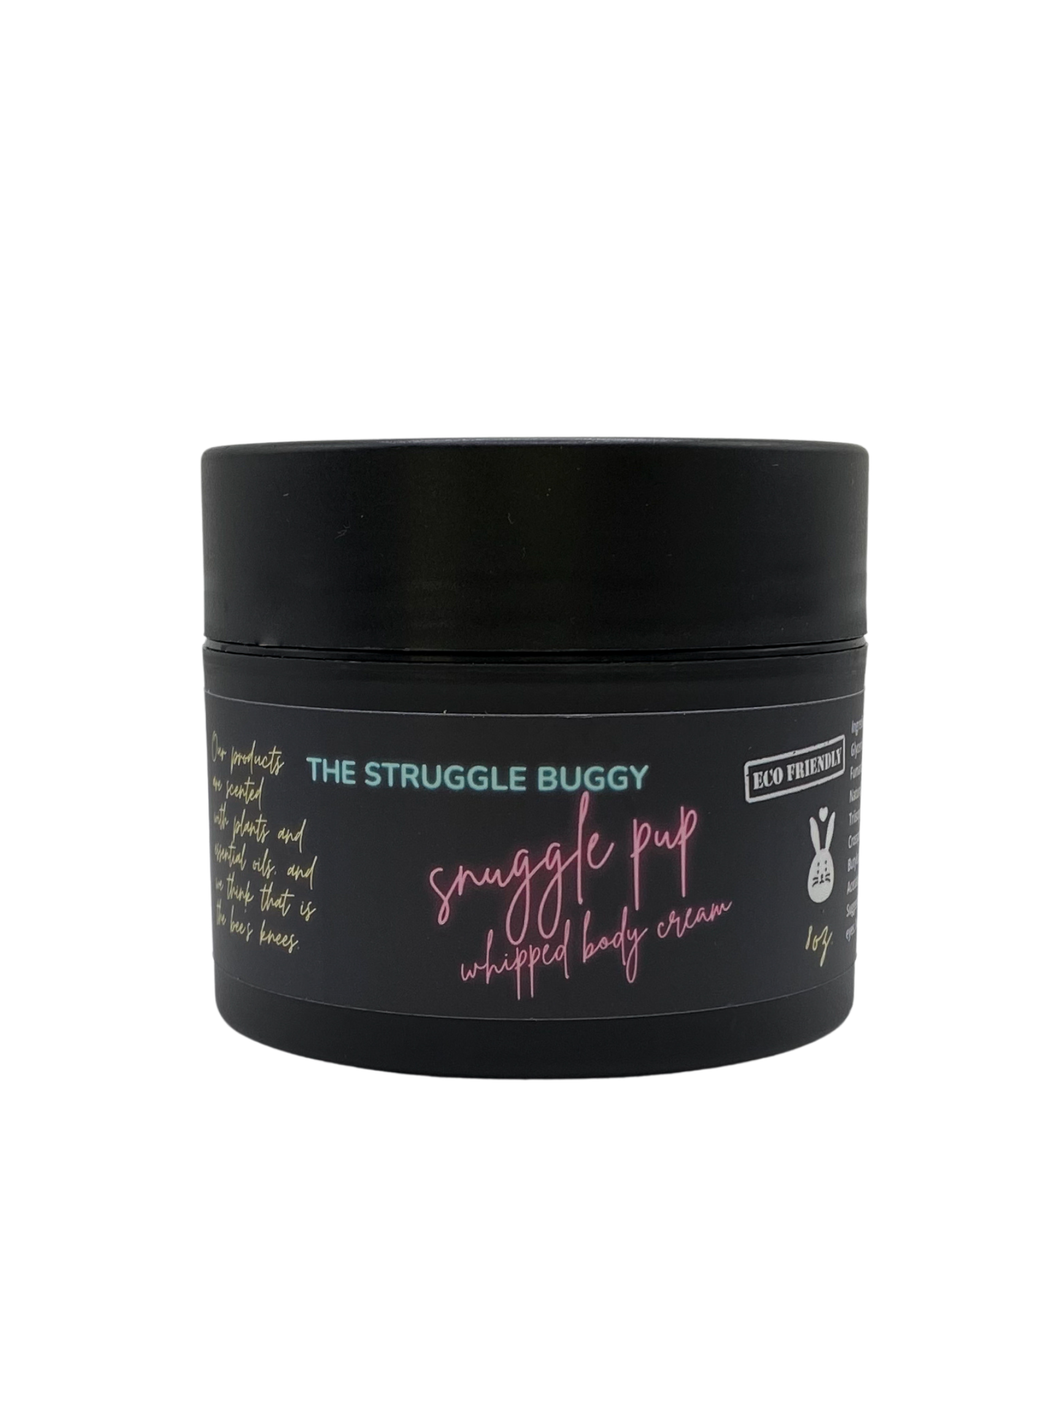 Snuggle Pup Whipped Body Cream